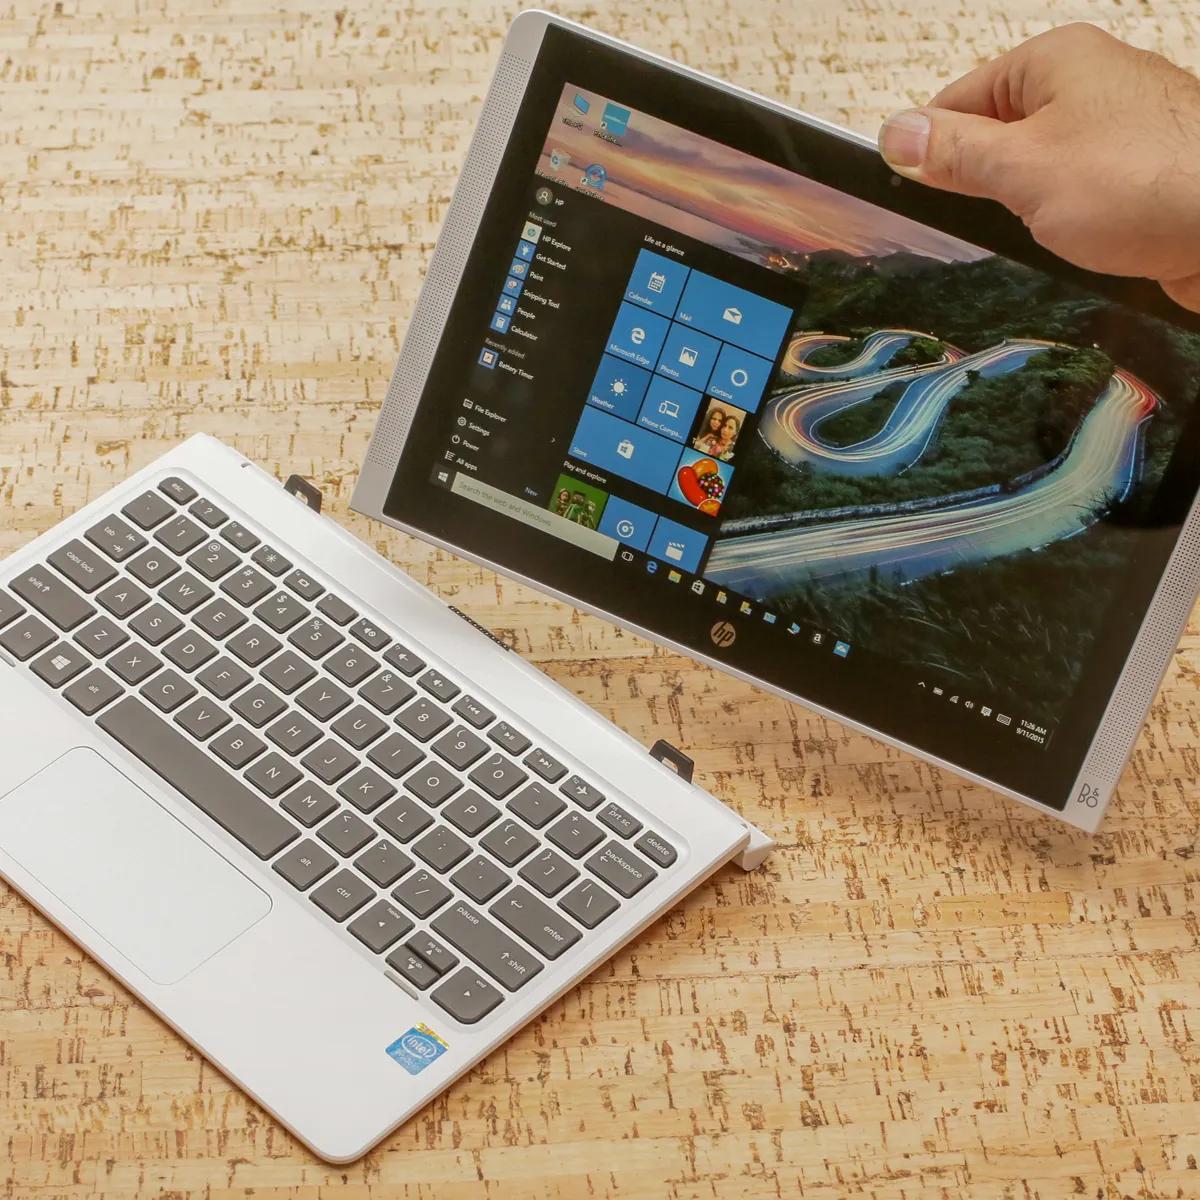 Hewlett packard all-in-one tablet: the ultimate 2-in-1 laptop